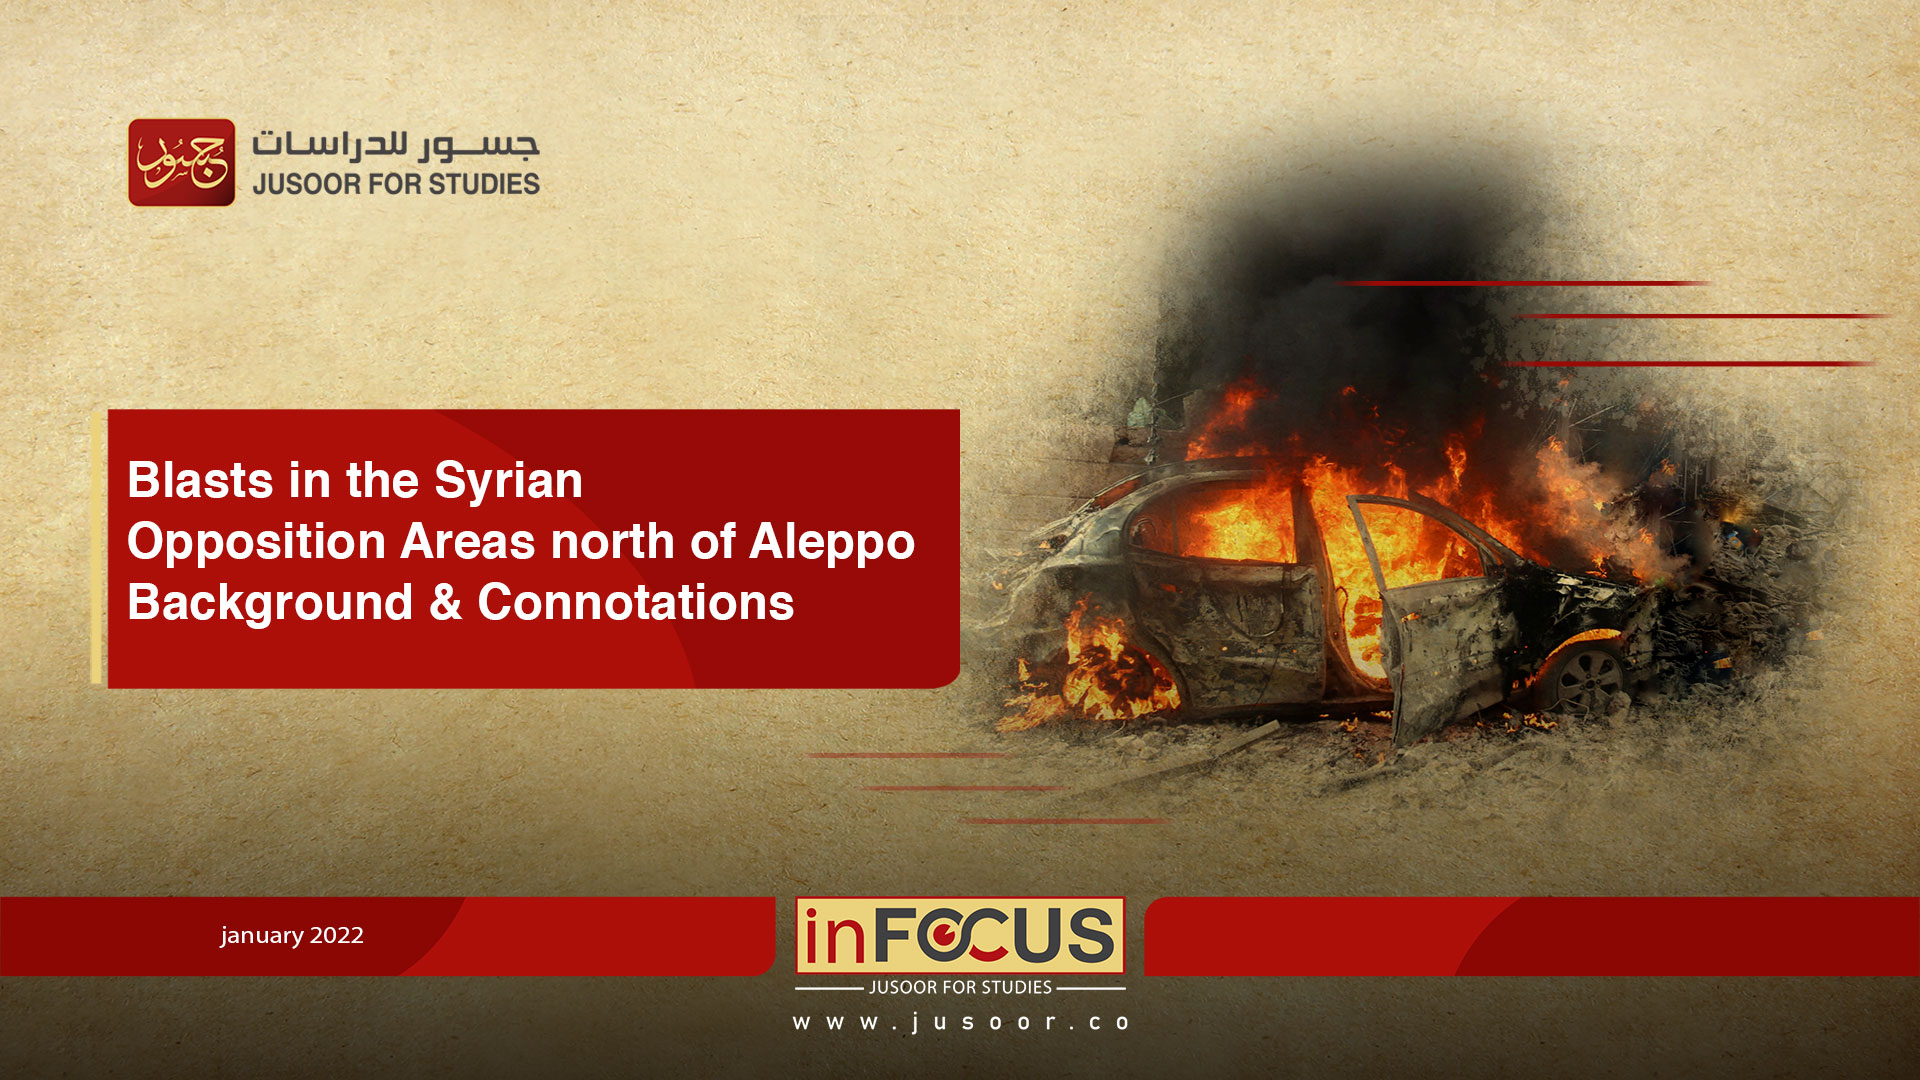 Blasts in the Syrian Opposition Areas north of Aleppo Background & Connotations